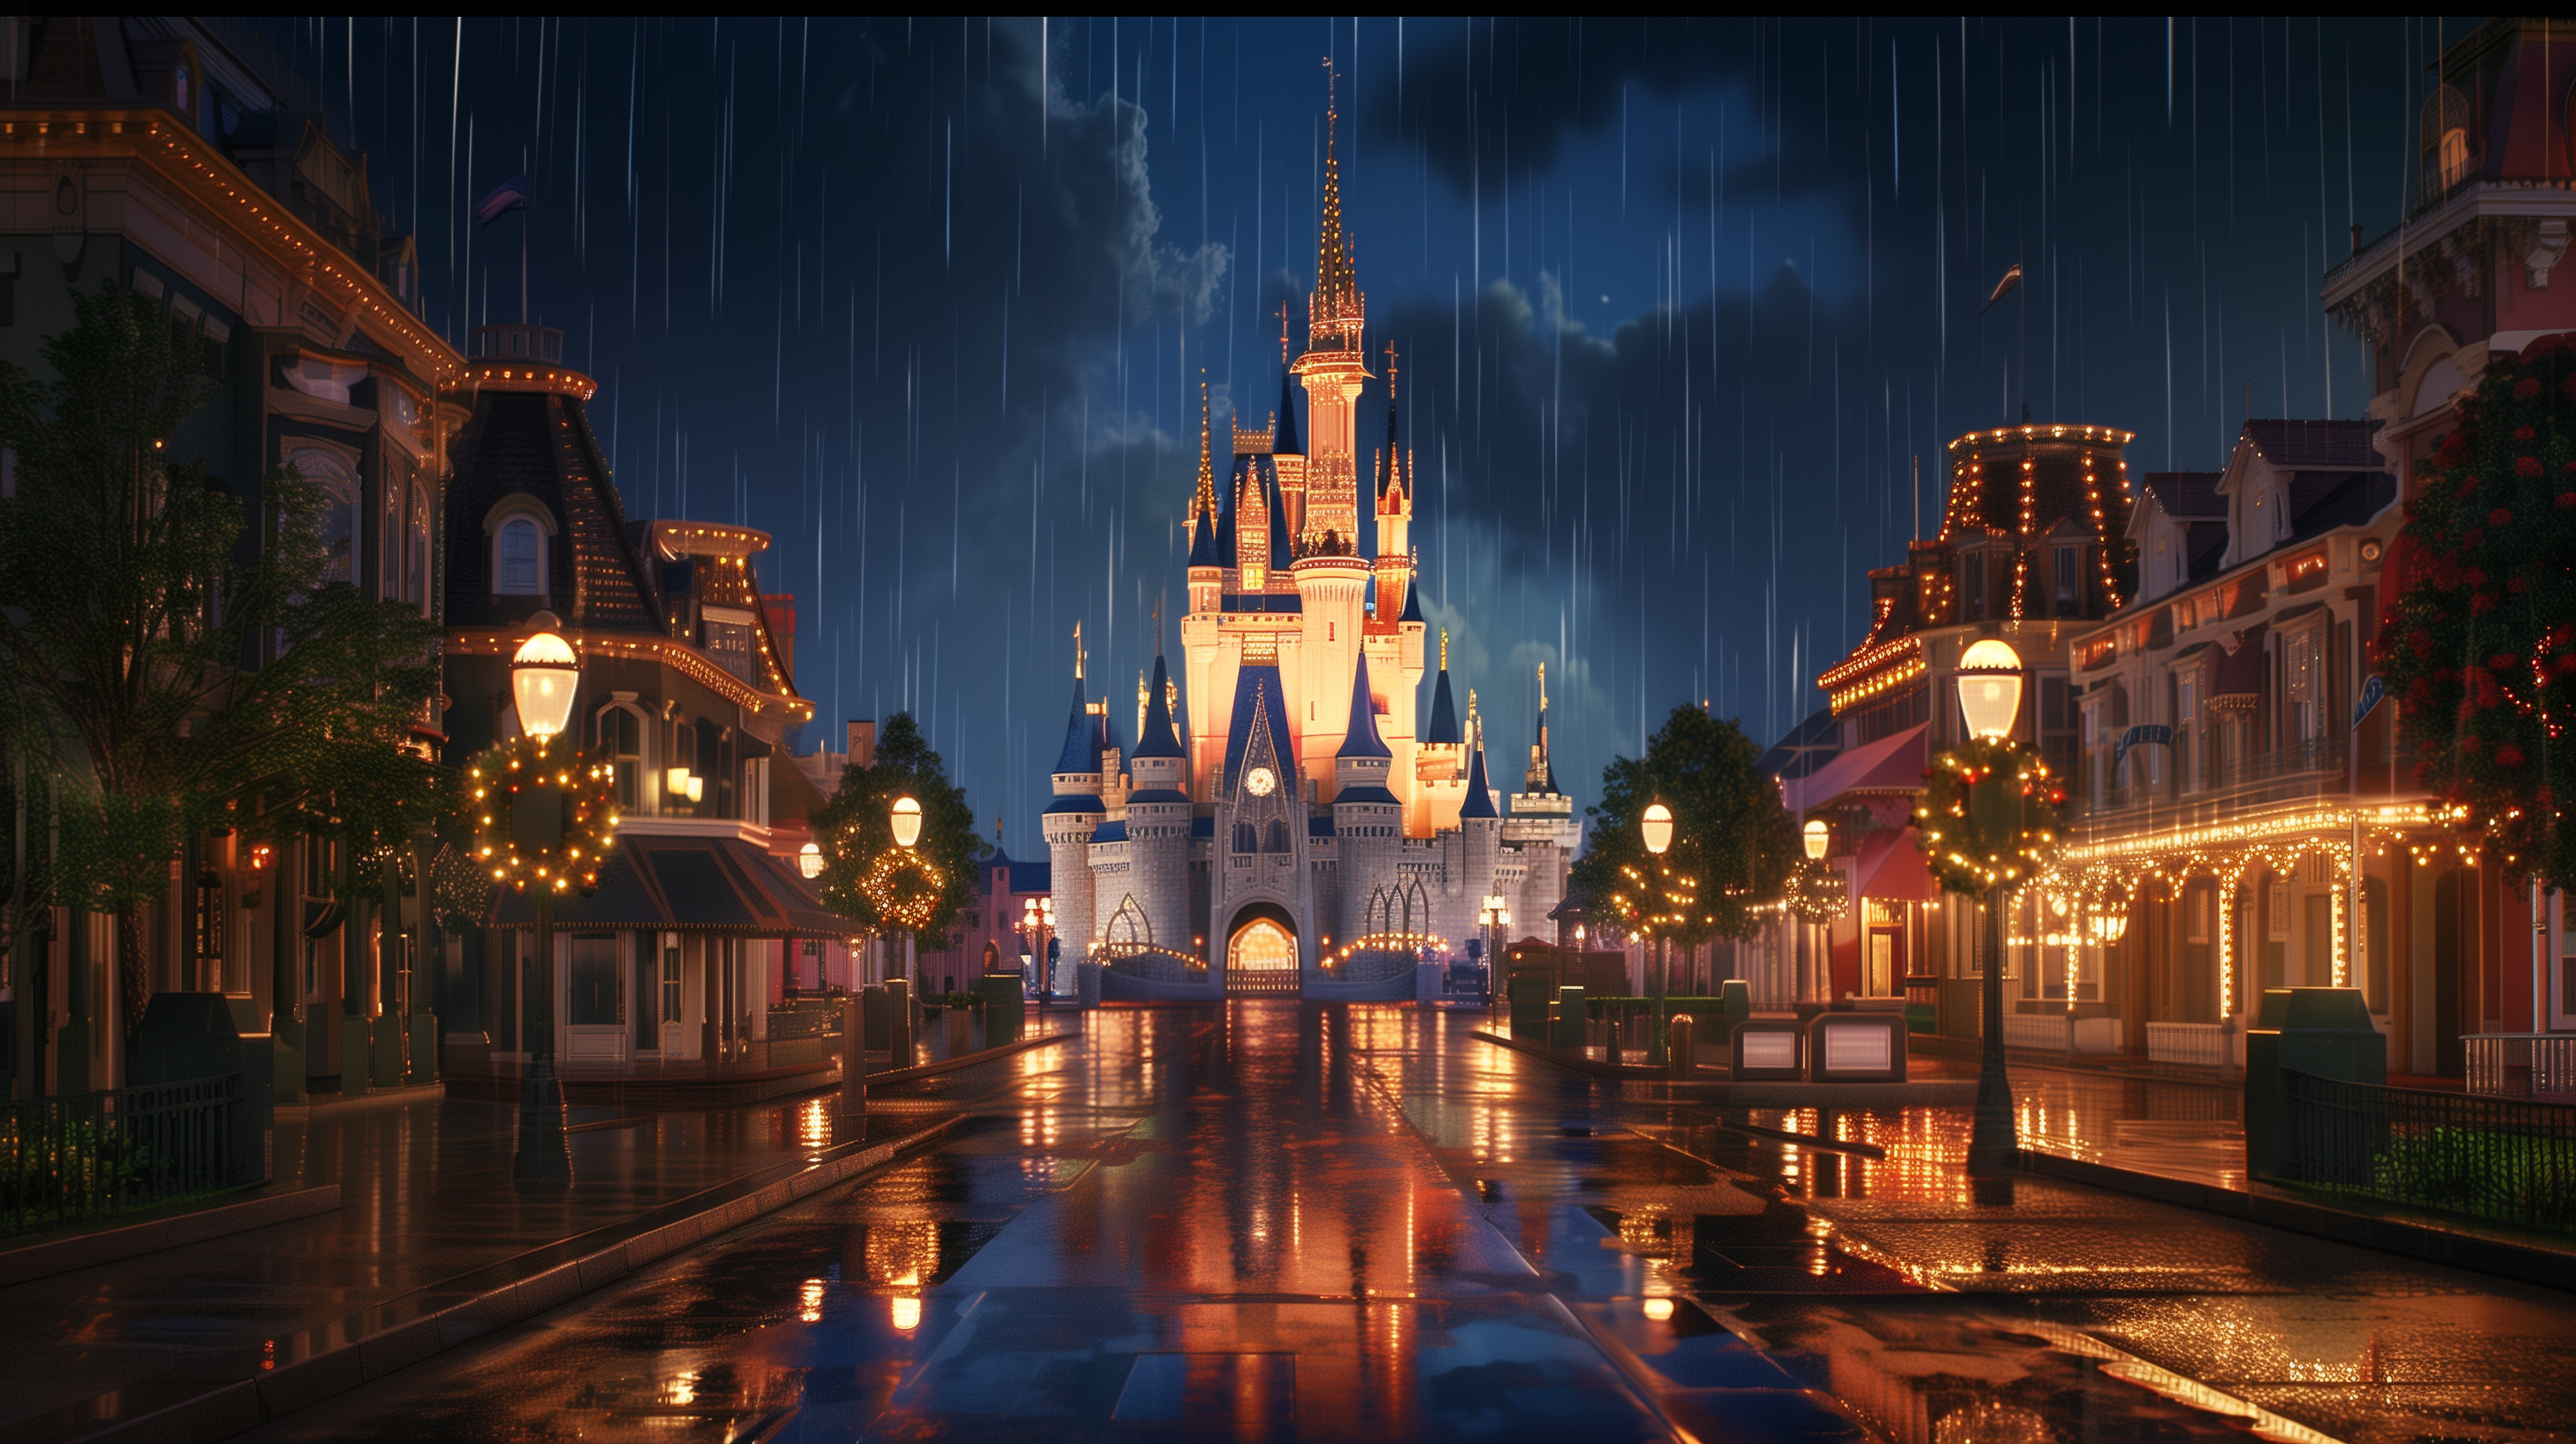 HD desktop wallpaper featuring Cinderella Castle at Walt Disney World, illuminated during a nighttime rain with reflections on the wet street in front.